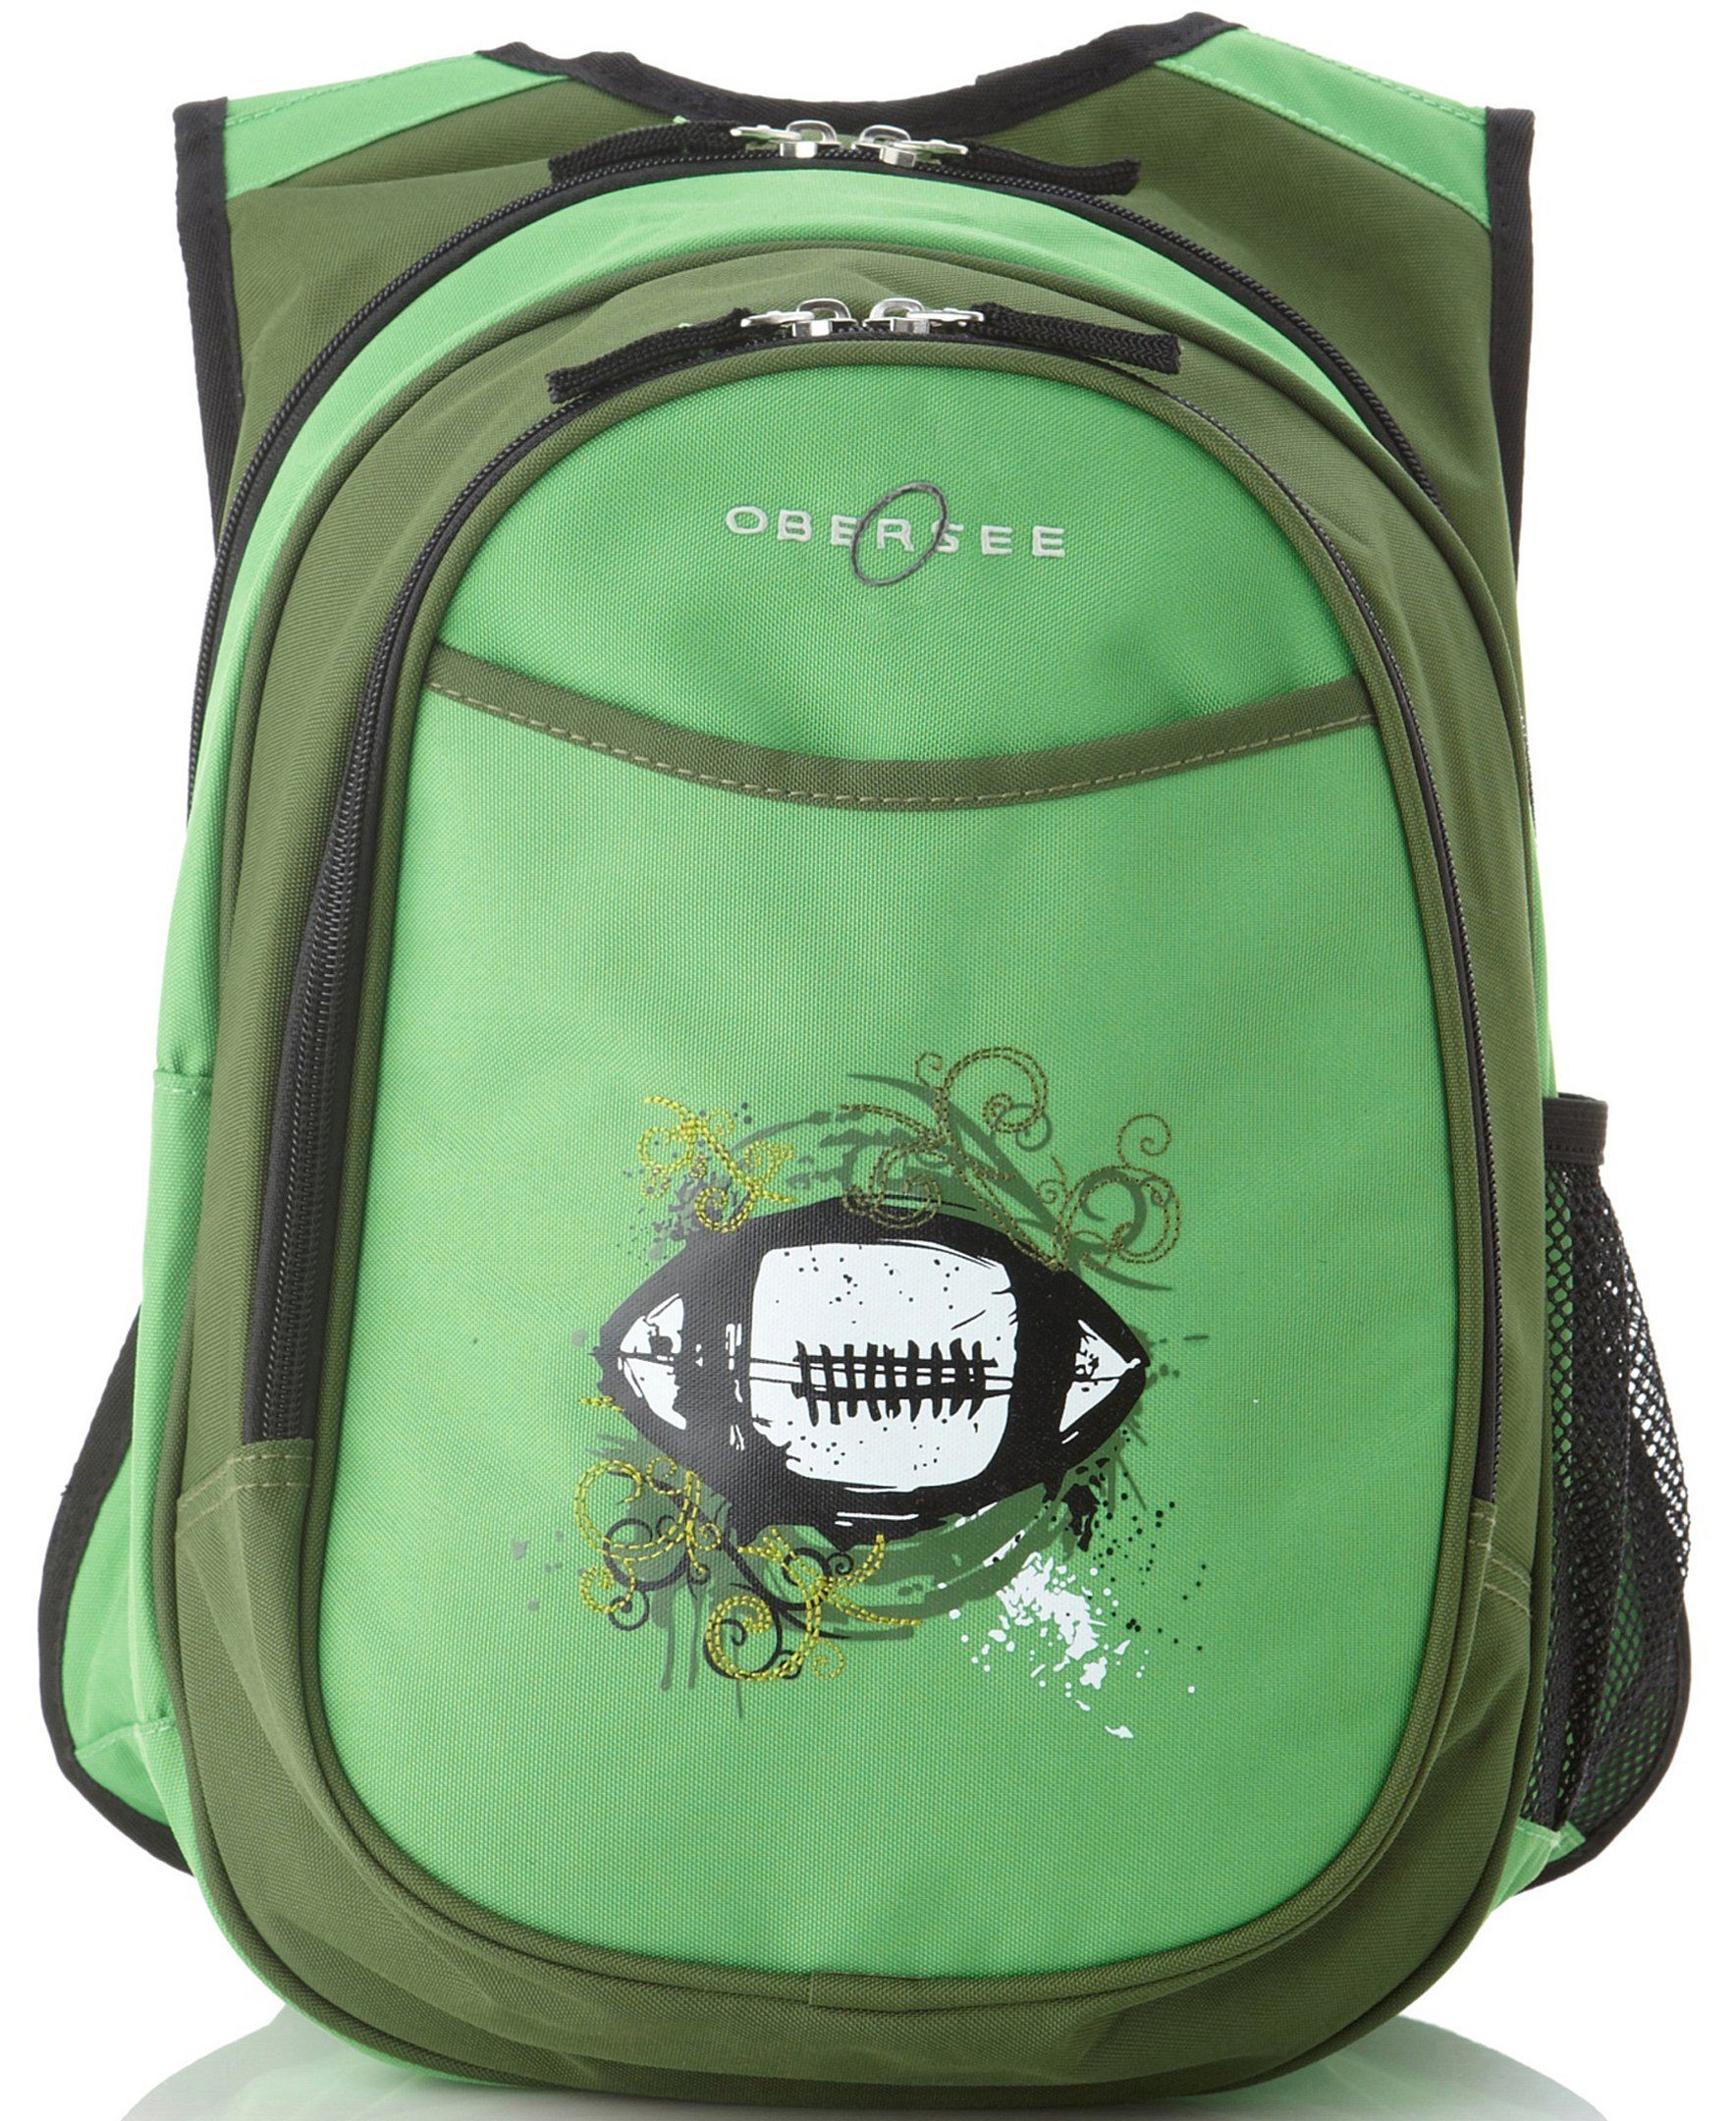 O3KCBP007 Obersee Mini Preschool All-in-One Backpack for Toddlers and Kids with integrated Insulated Cooler | Green Football - image 1 of 4